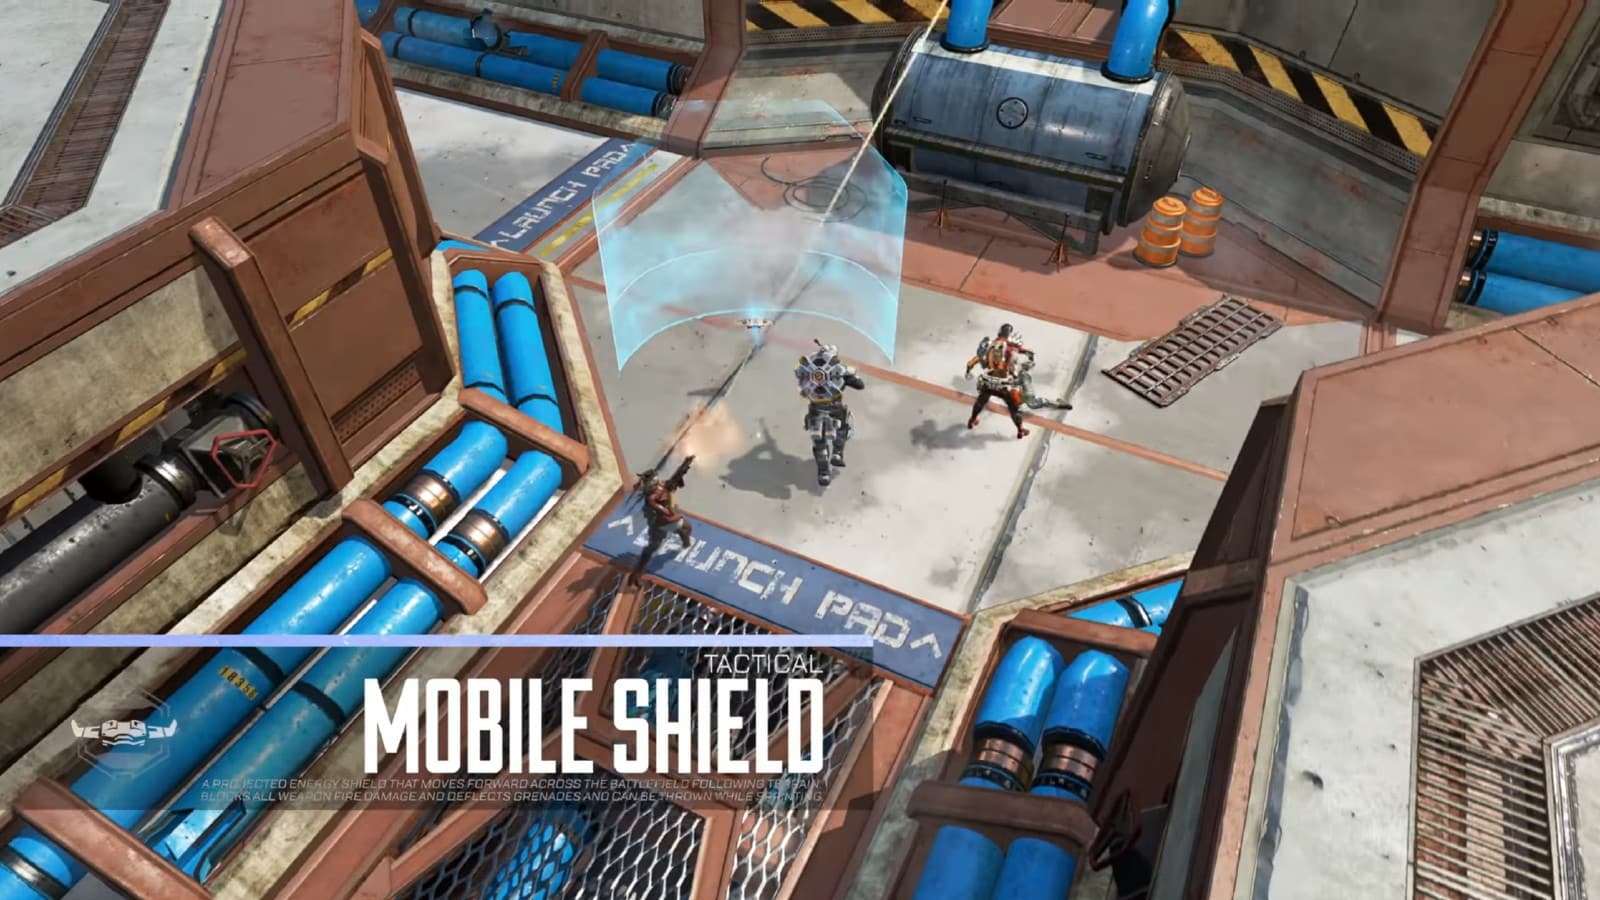 Newcastle Mobile Shield Tactical